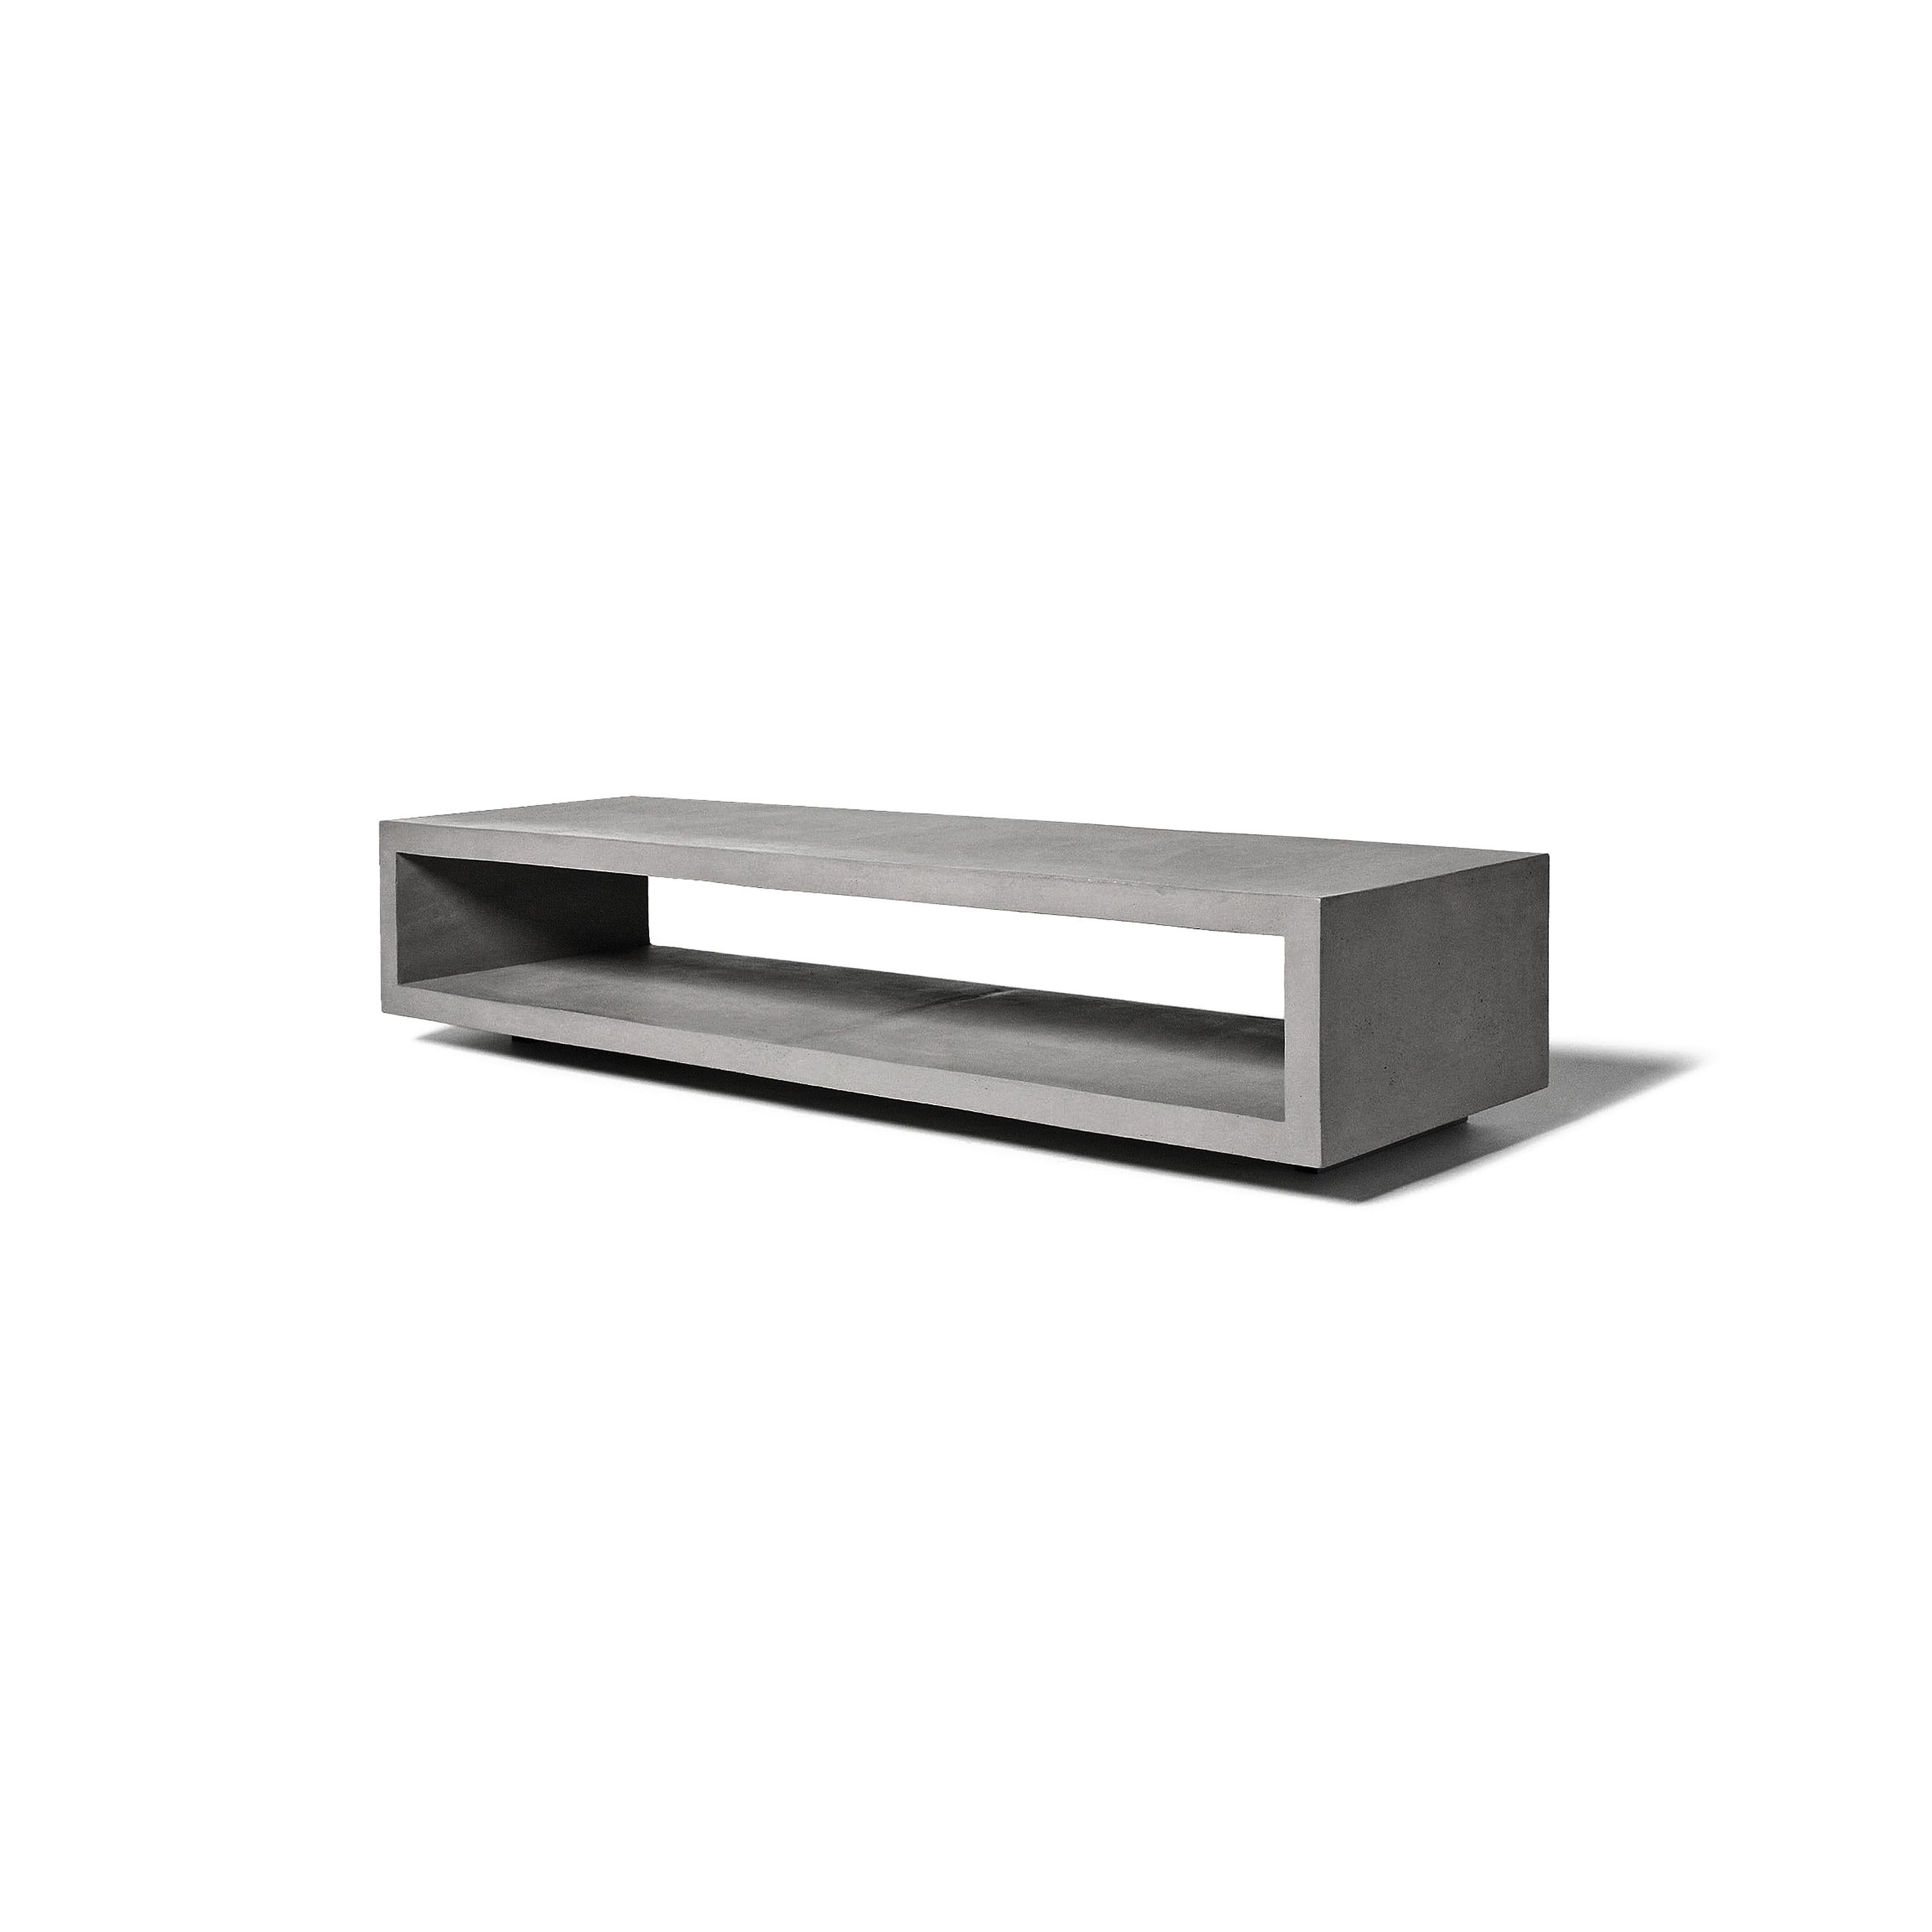 The Concrete Monobloc TV Bench designed by Lyon Béton rolls beautifully on the ground and is specially designed to accomodate your flat screen TV. Characterized by its clean lines, its straightforward geometric configuration, its simplistic